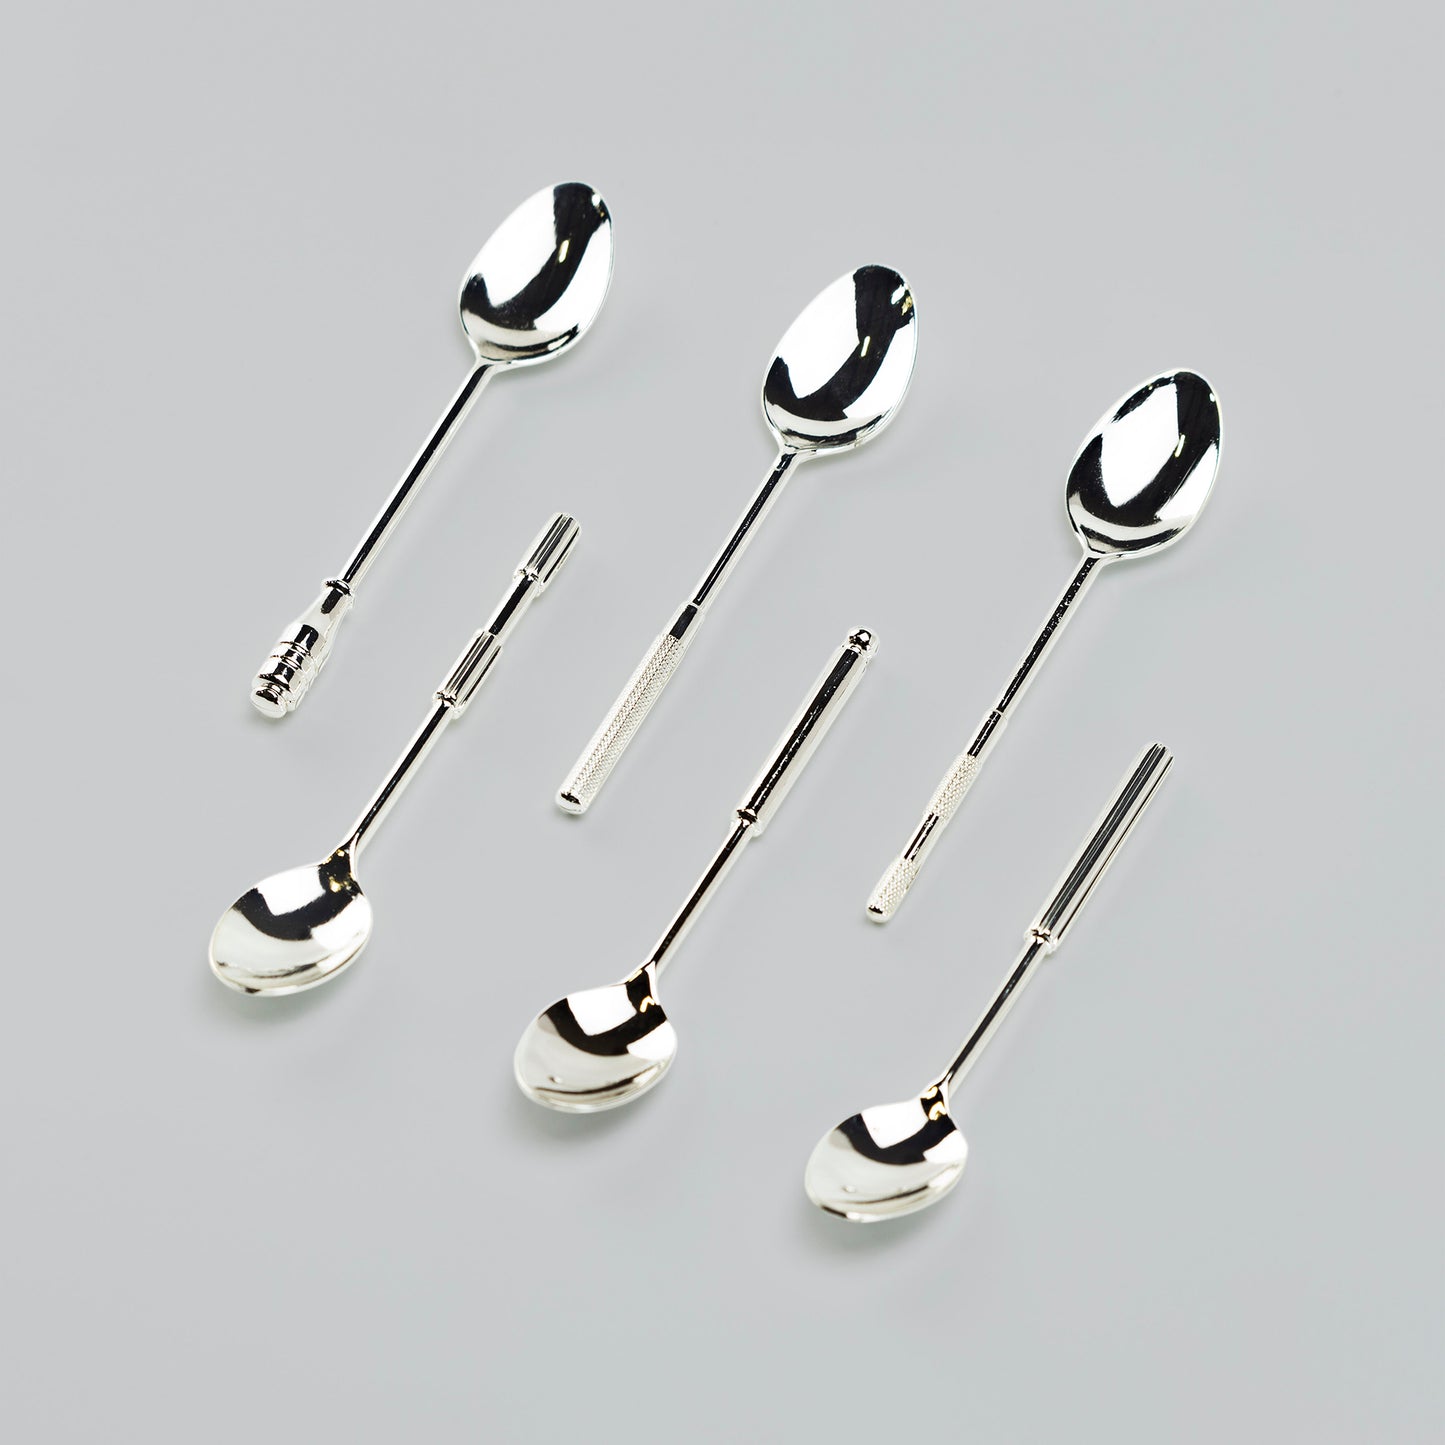 Silver Plated Demi Spoon Set of 6 with Assorted Texture Handle Design